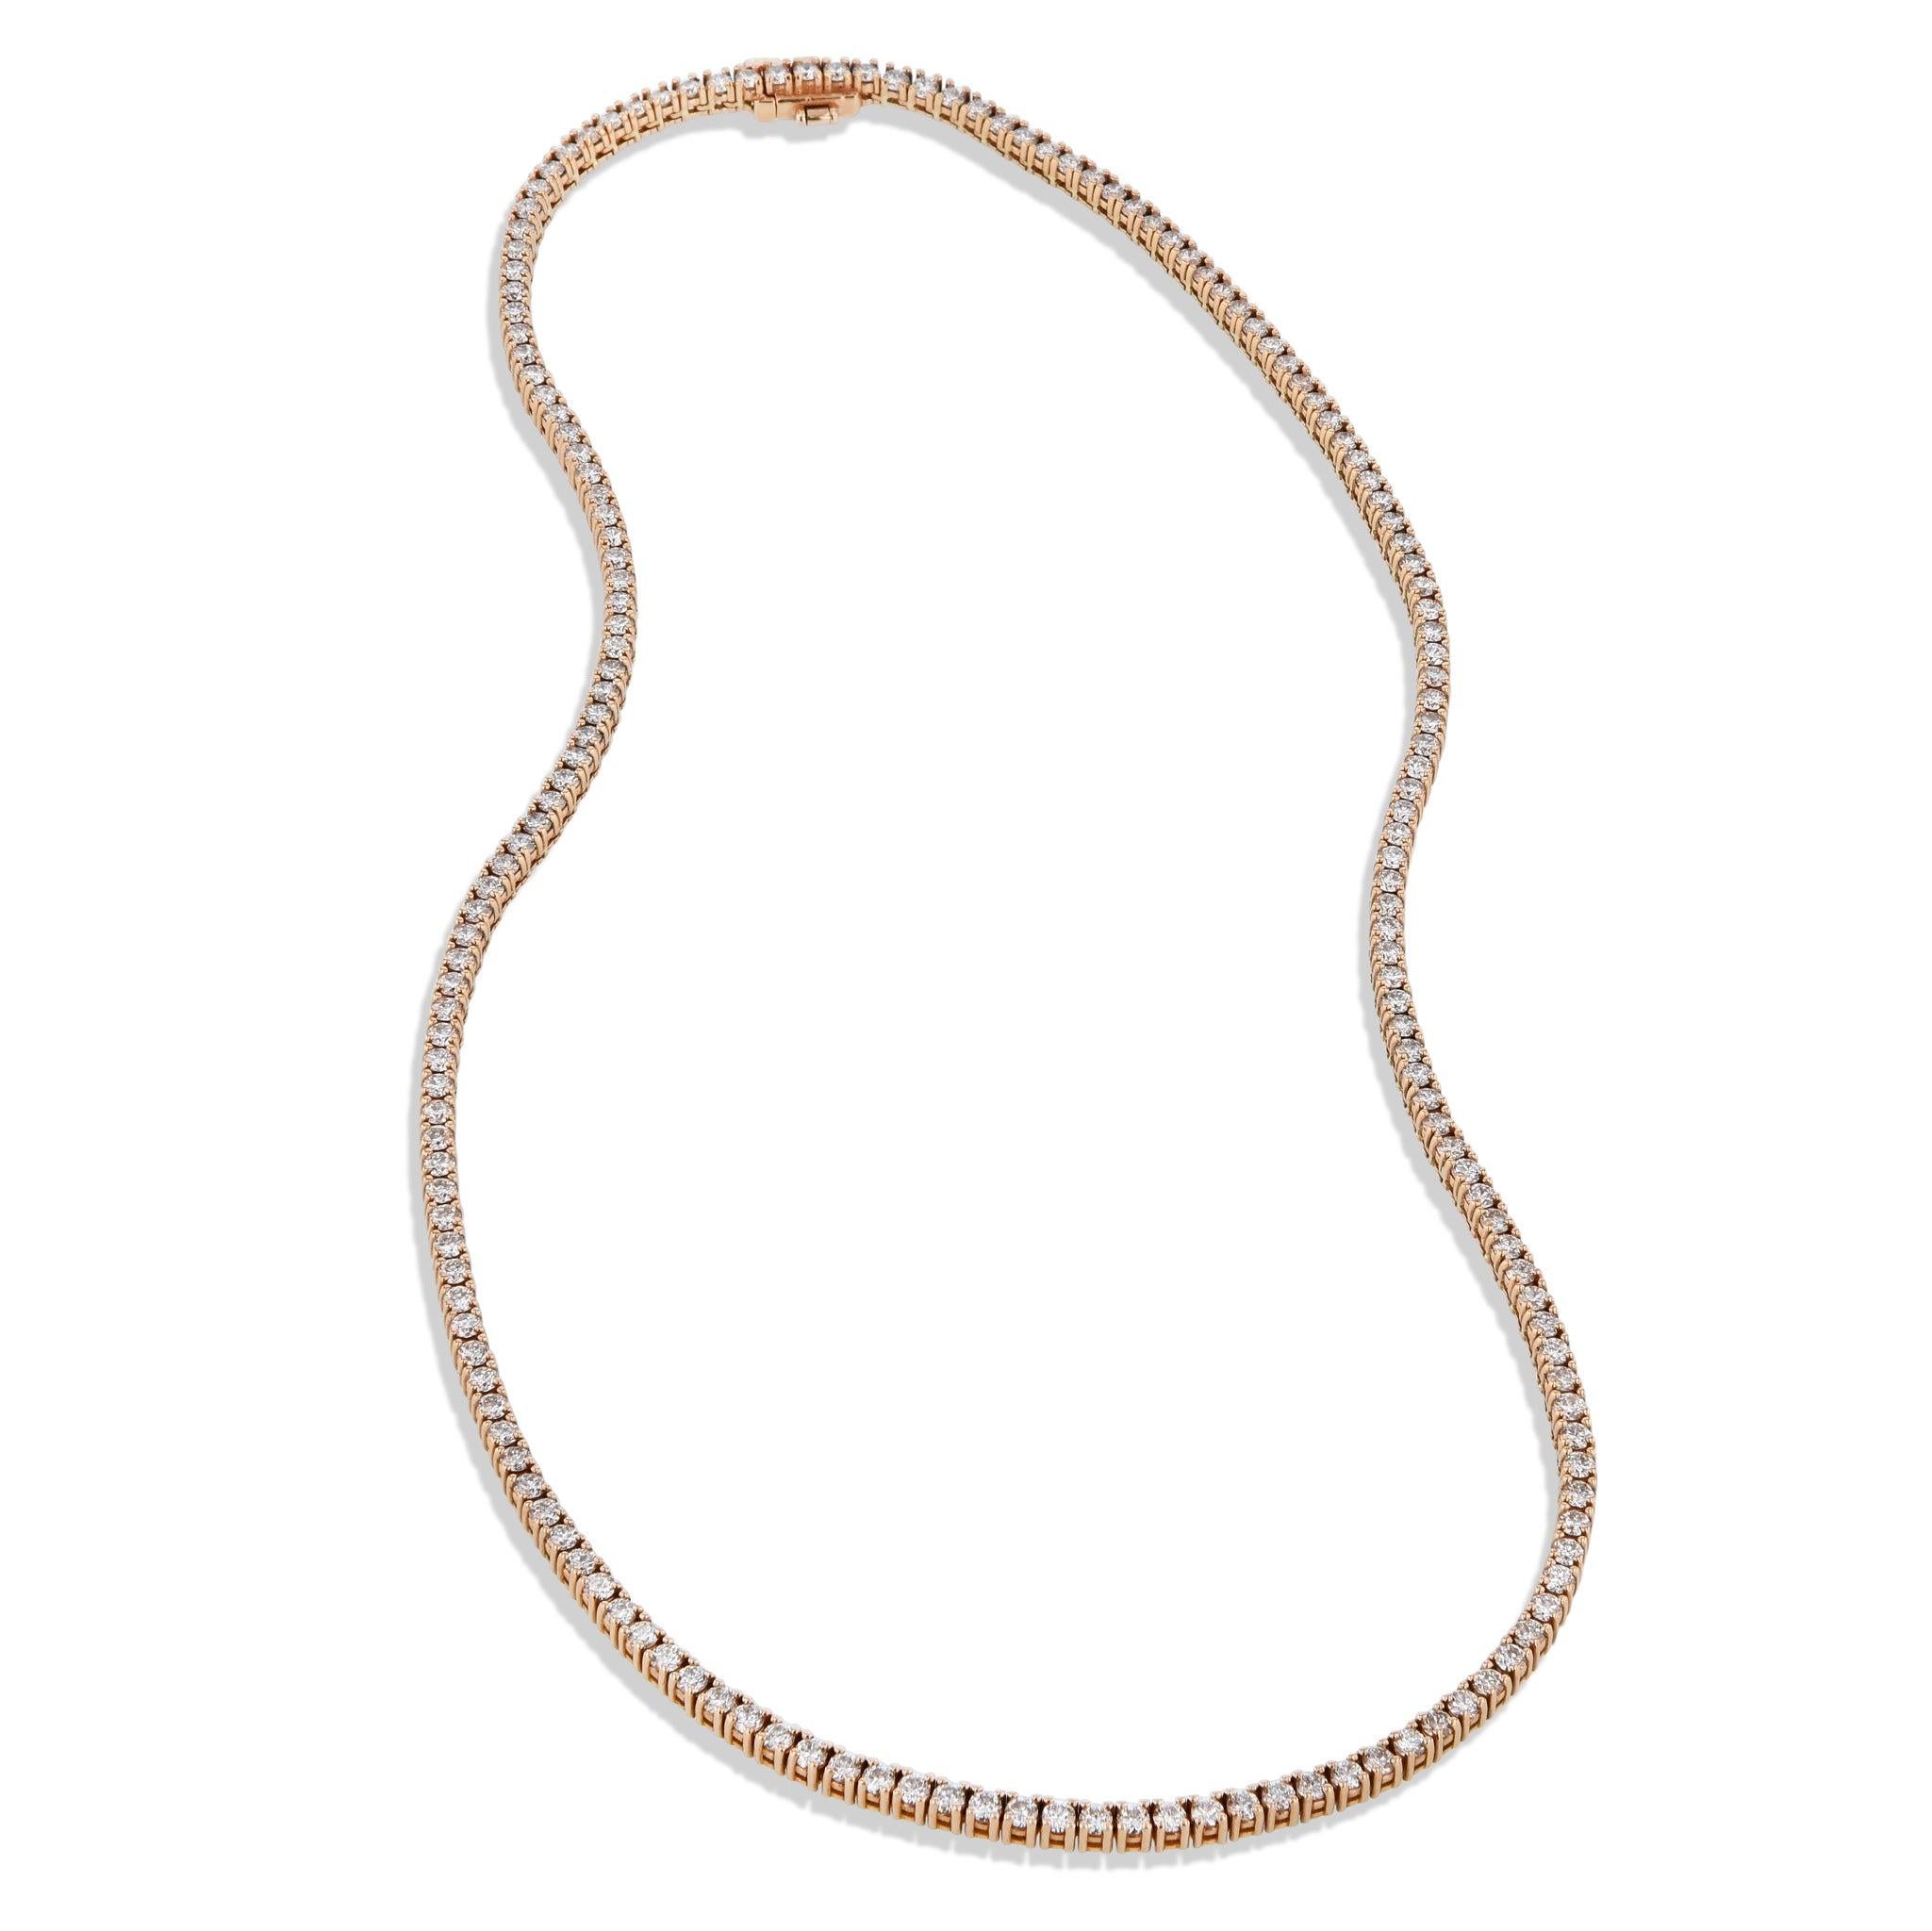 Glimmering in 18kt rose gold, this awe-inspiring tennis necklace comes alive with 175 dazzling diamonds. Crafted 16